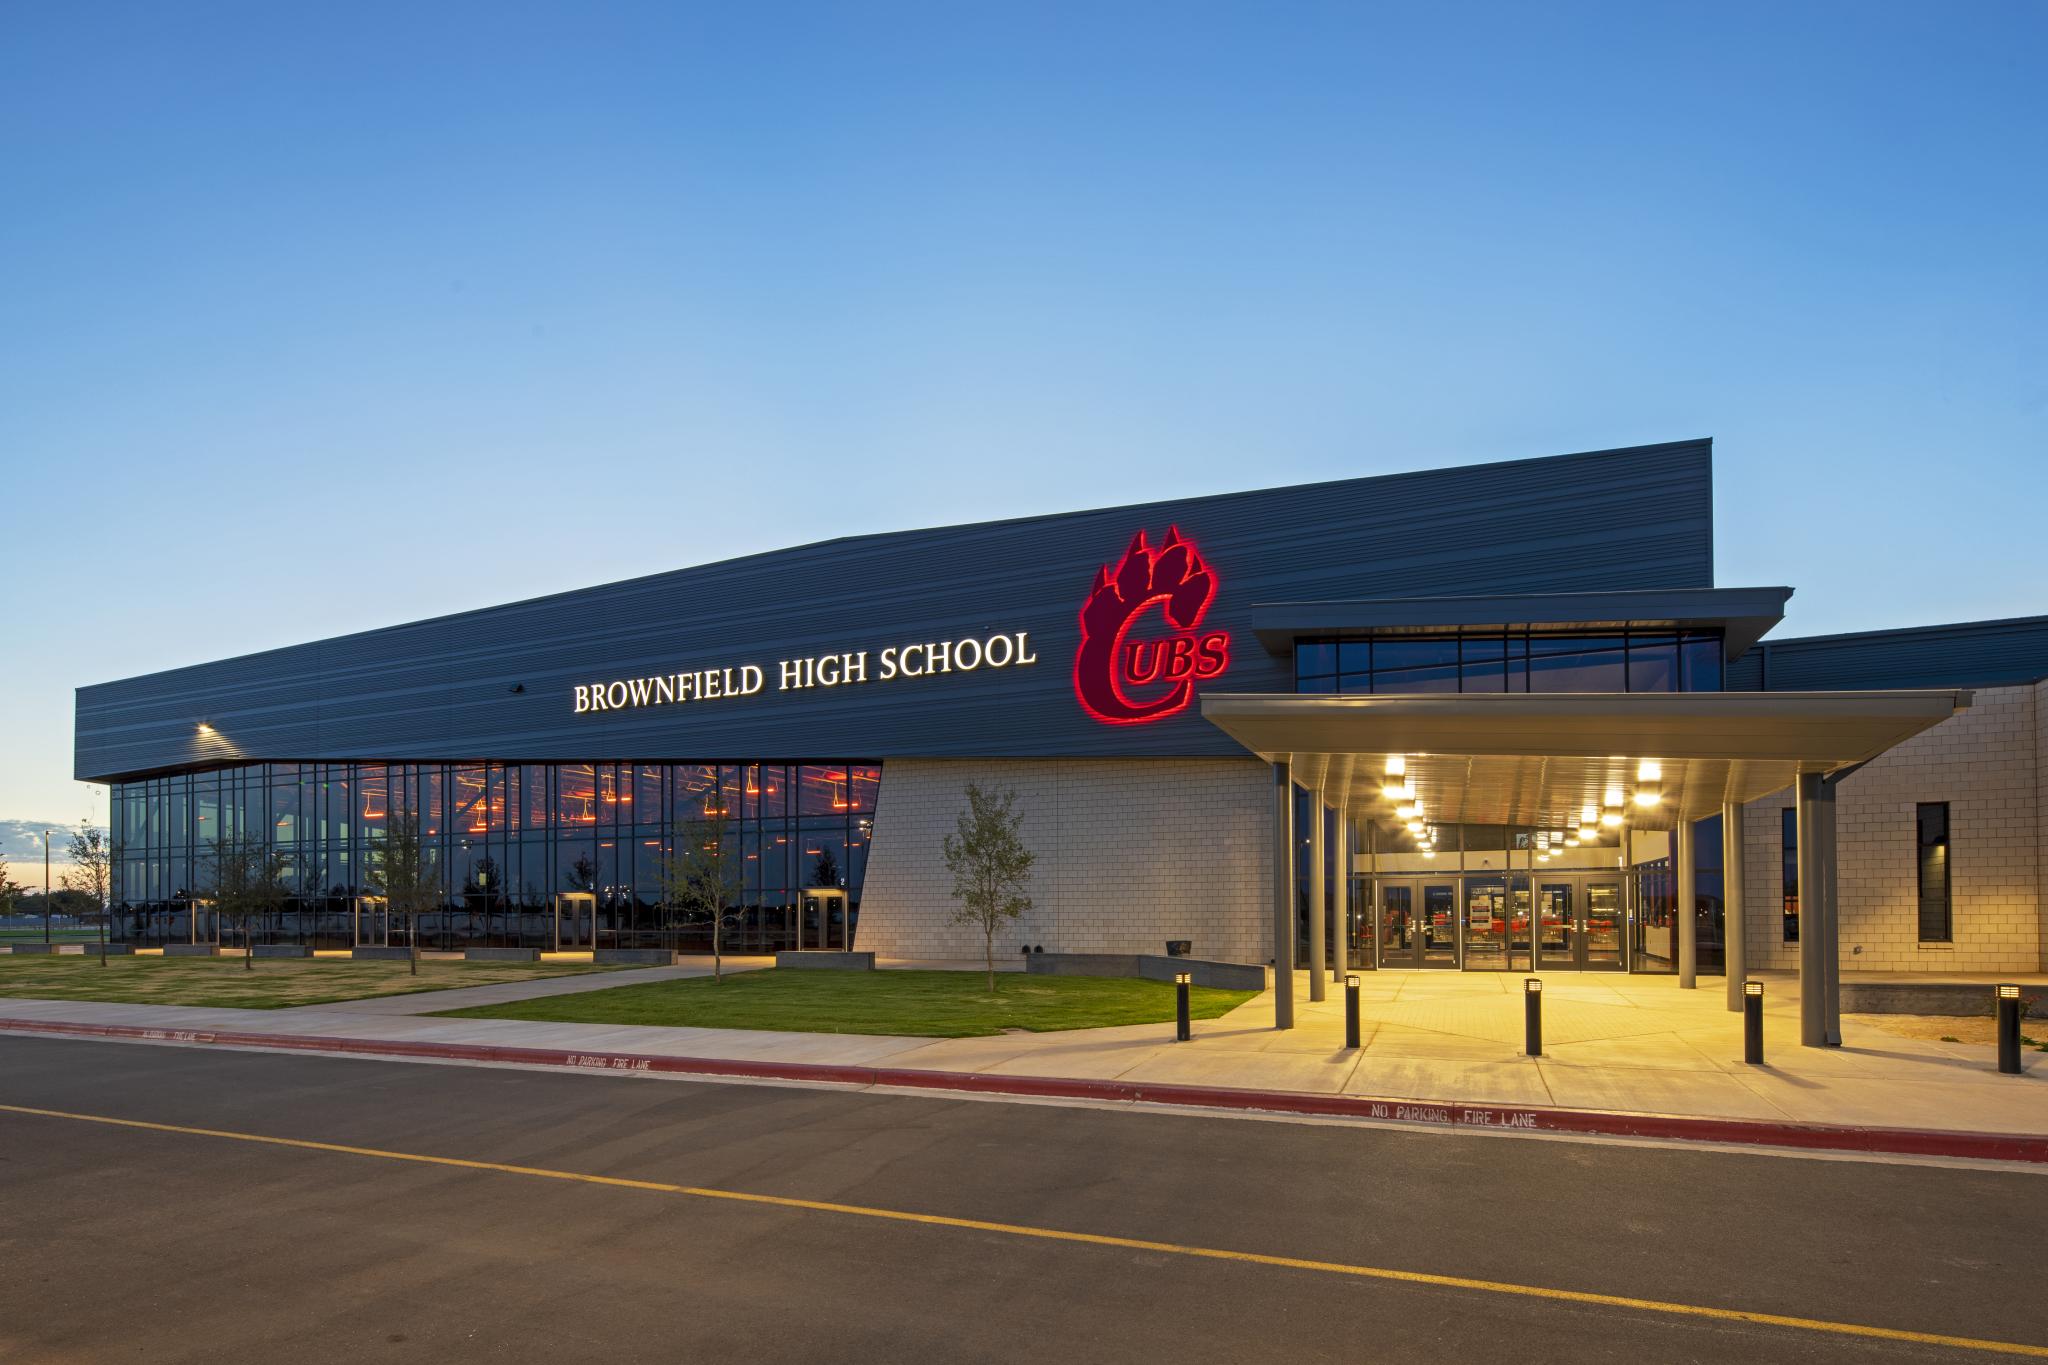 image of Brownfield High School entrance